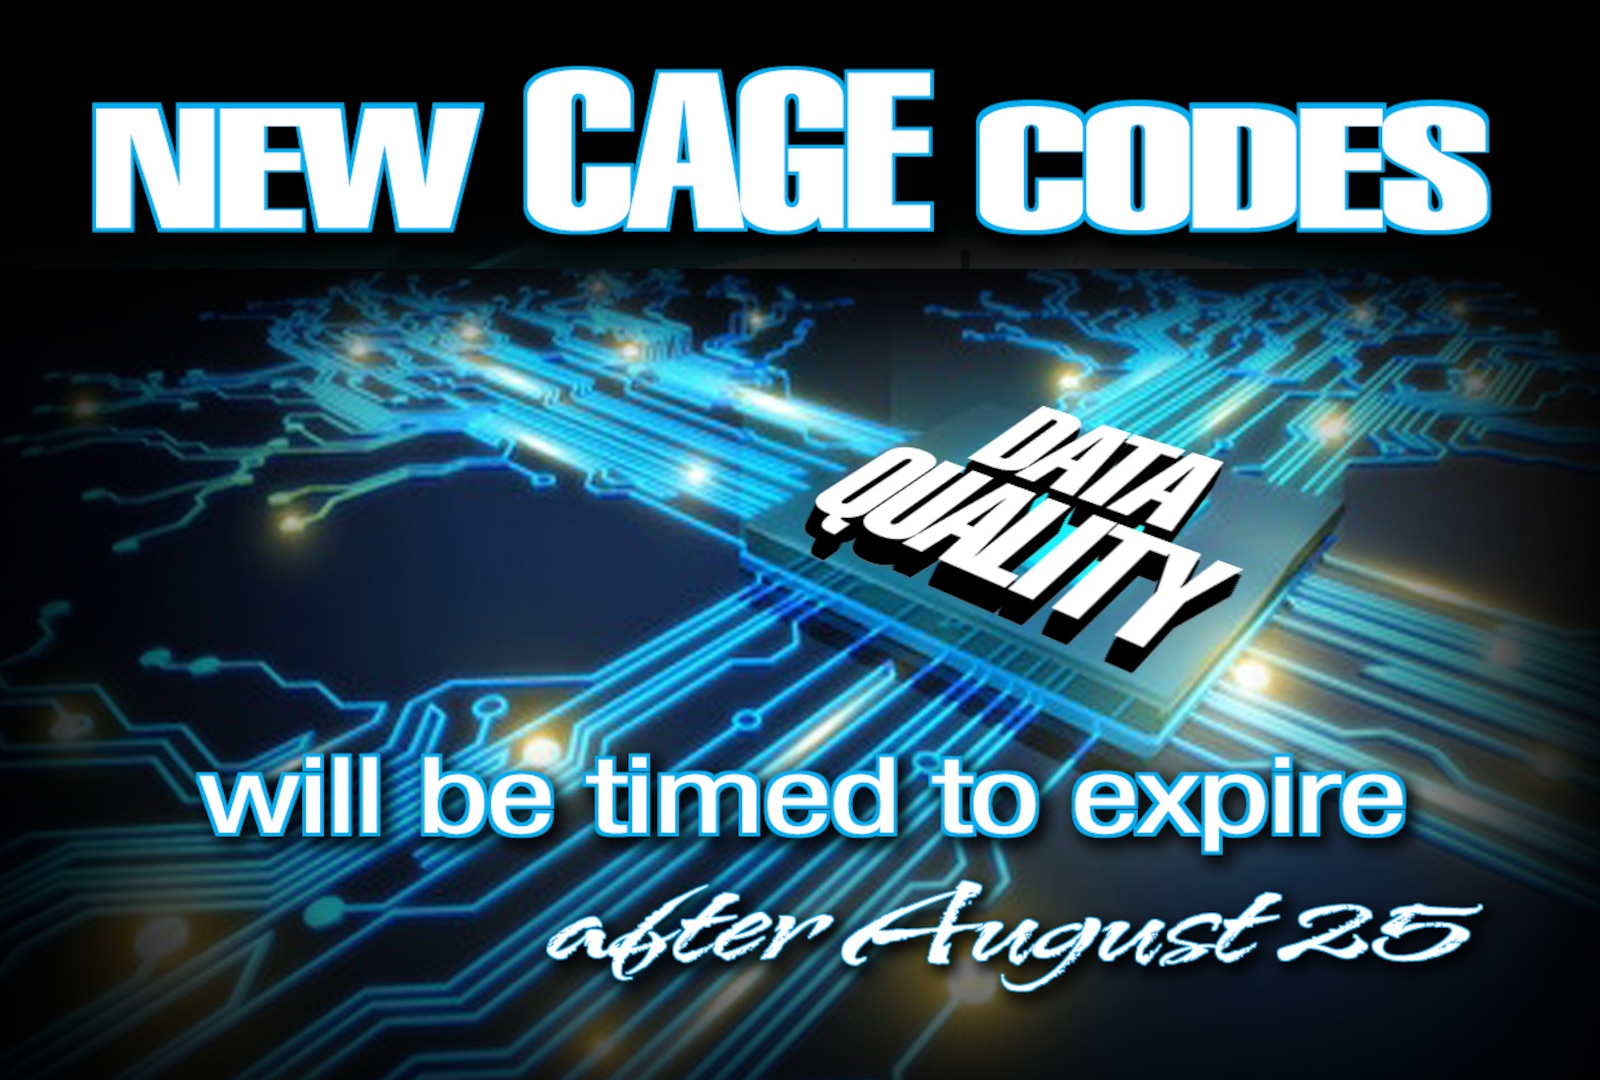 Some CAGE codes will expire after August 25, 2016.